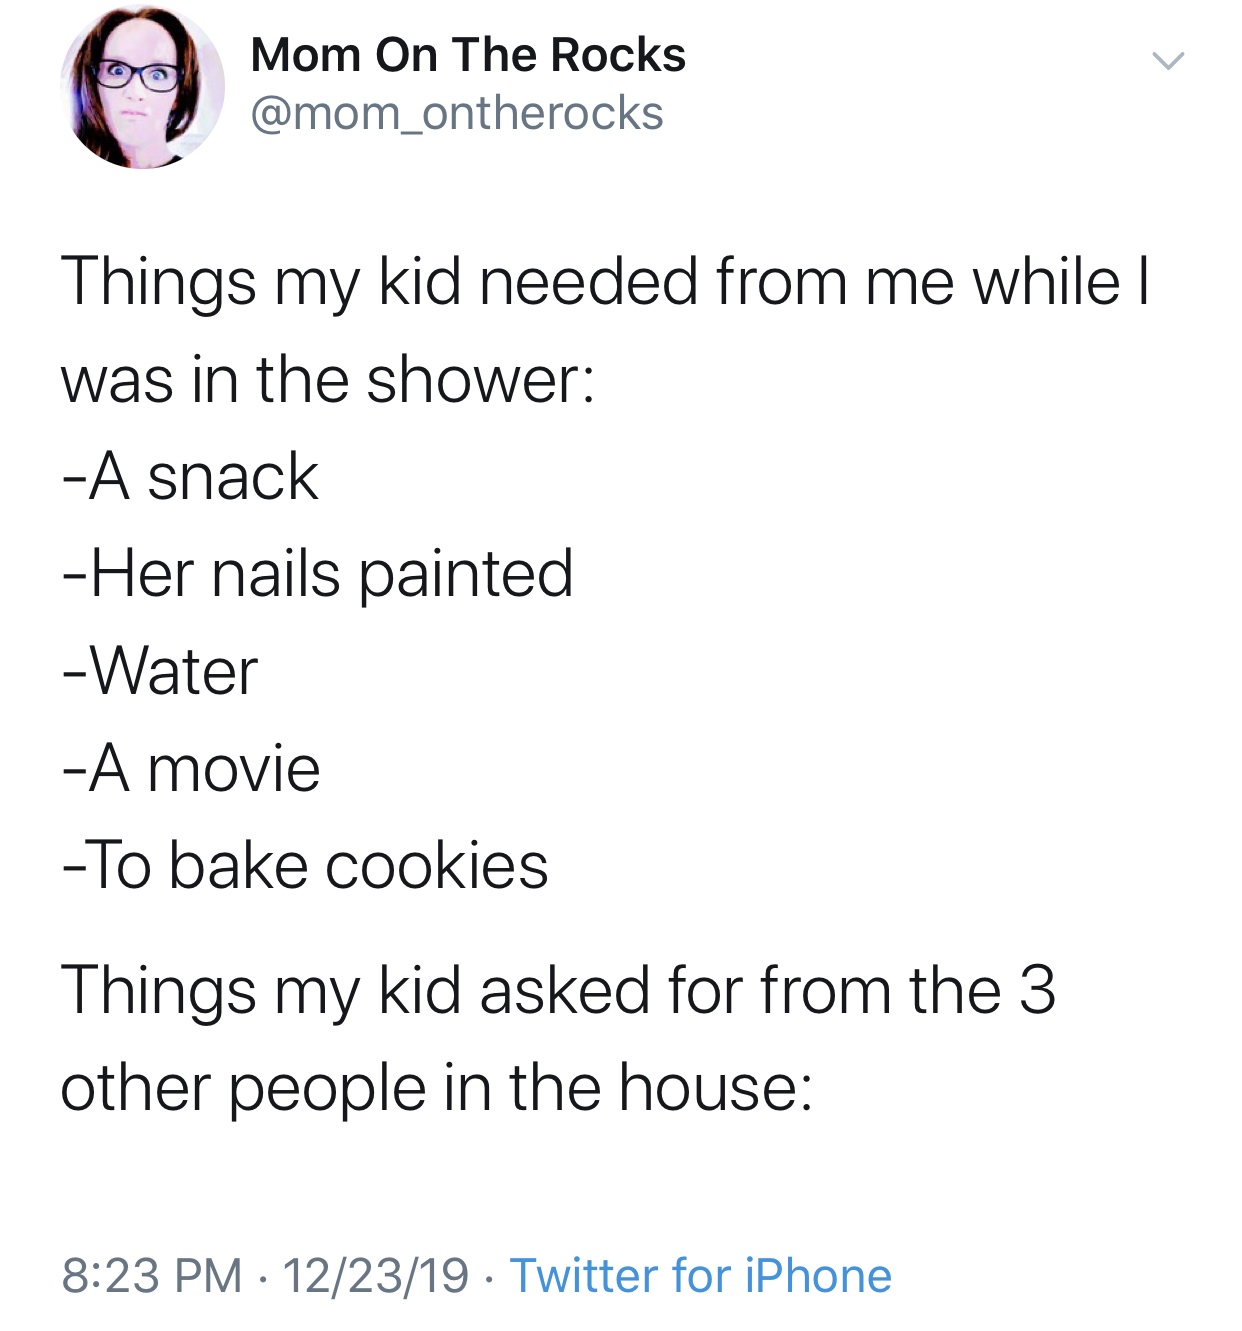 lin manuel miranda tweets - Mom On The Rocks Things my kid needed from me while | was in the shower A snack Her nails painted Water A movie To bake cookies Things my kid asked for from the 3 other people in the house 122319 Twitter for iPhone